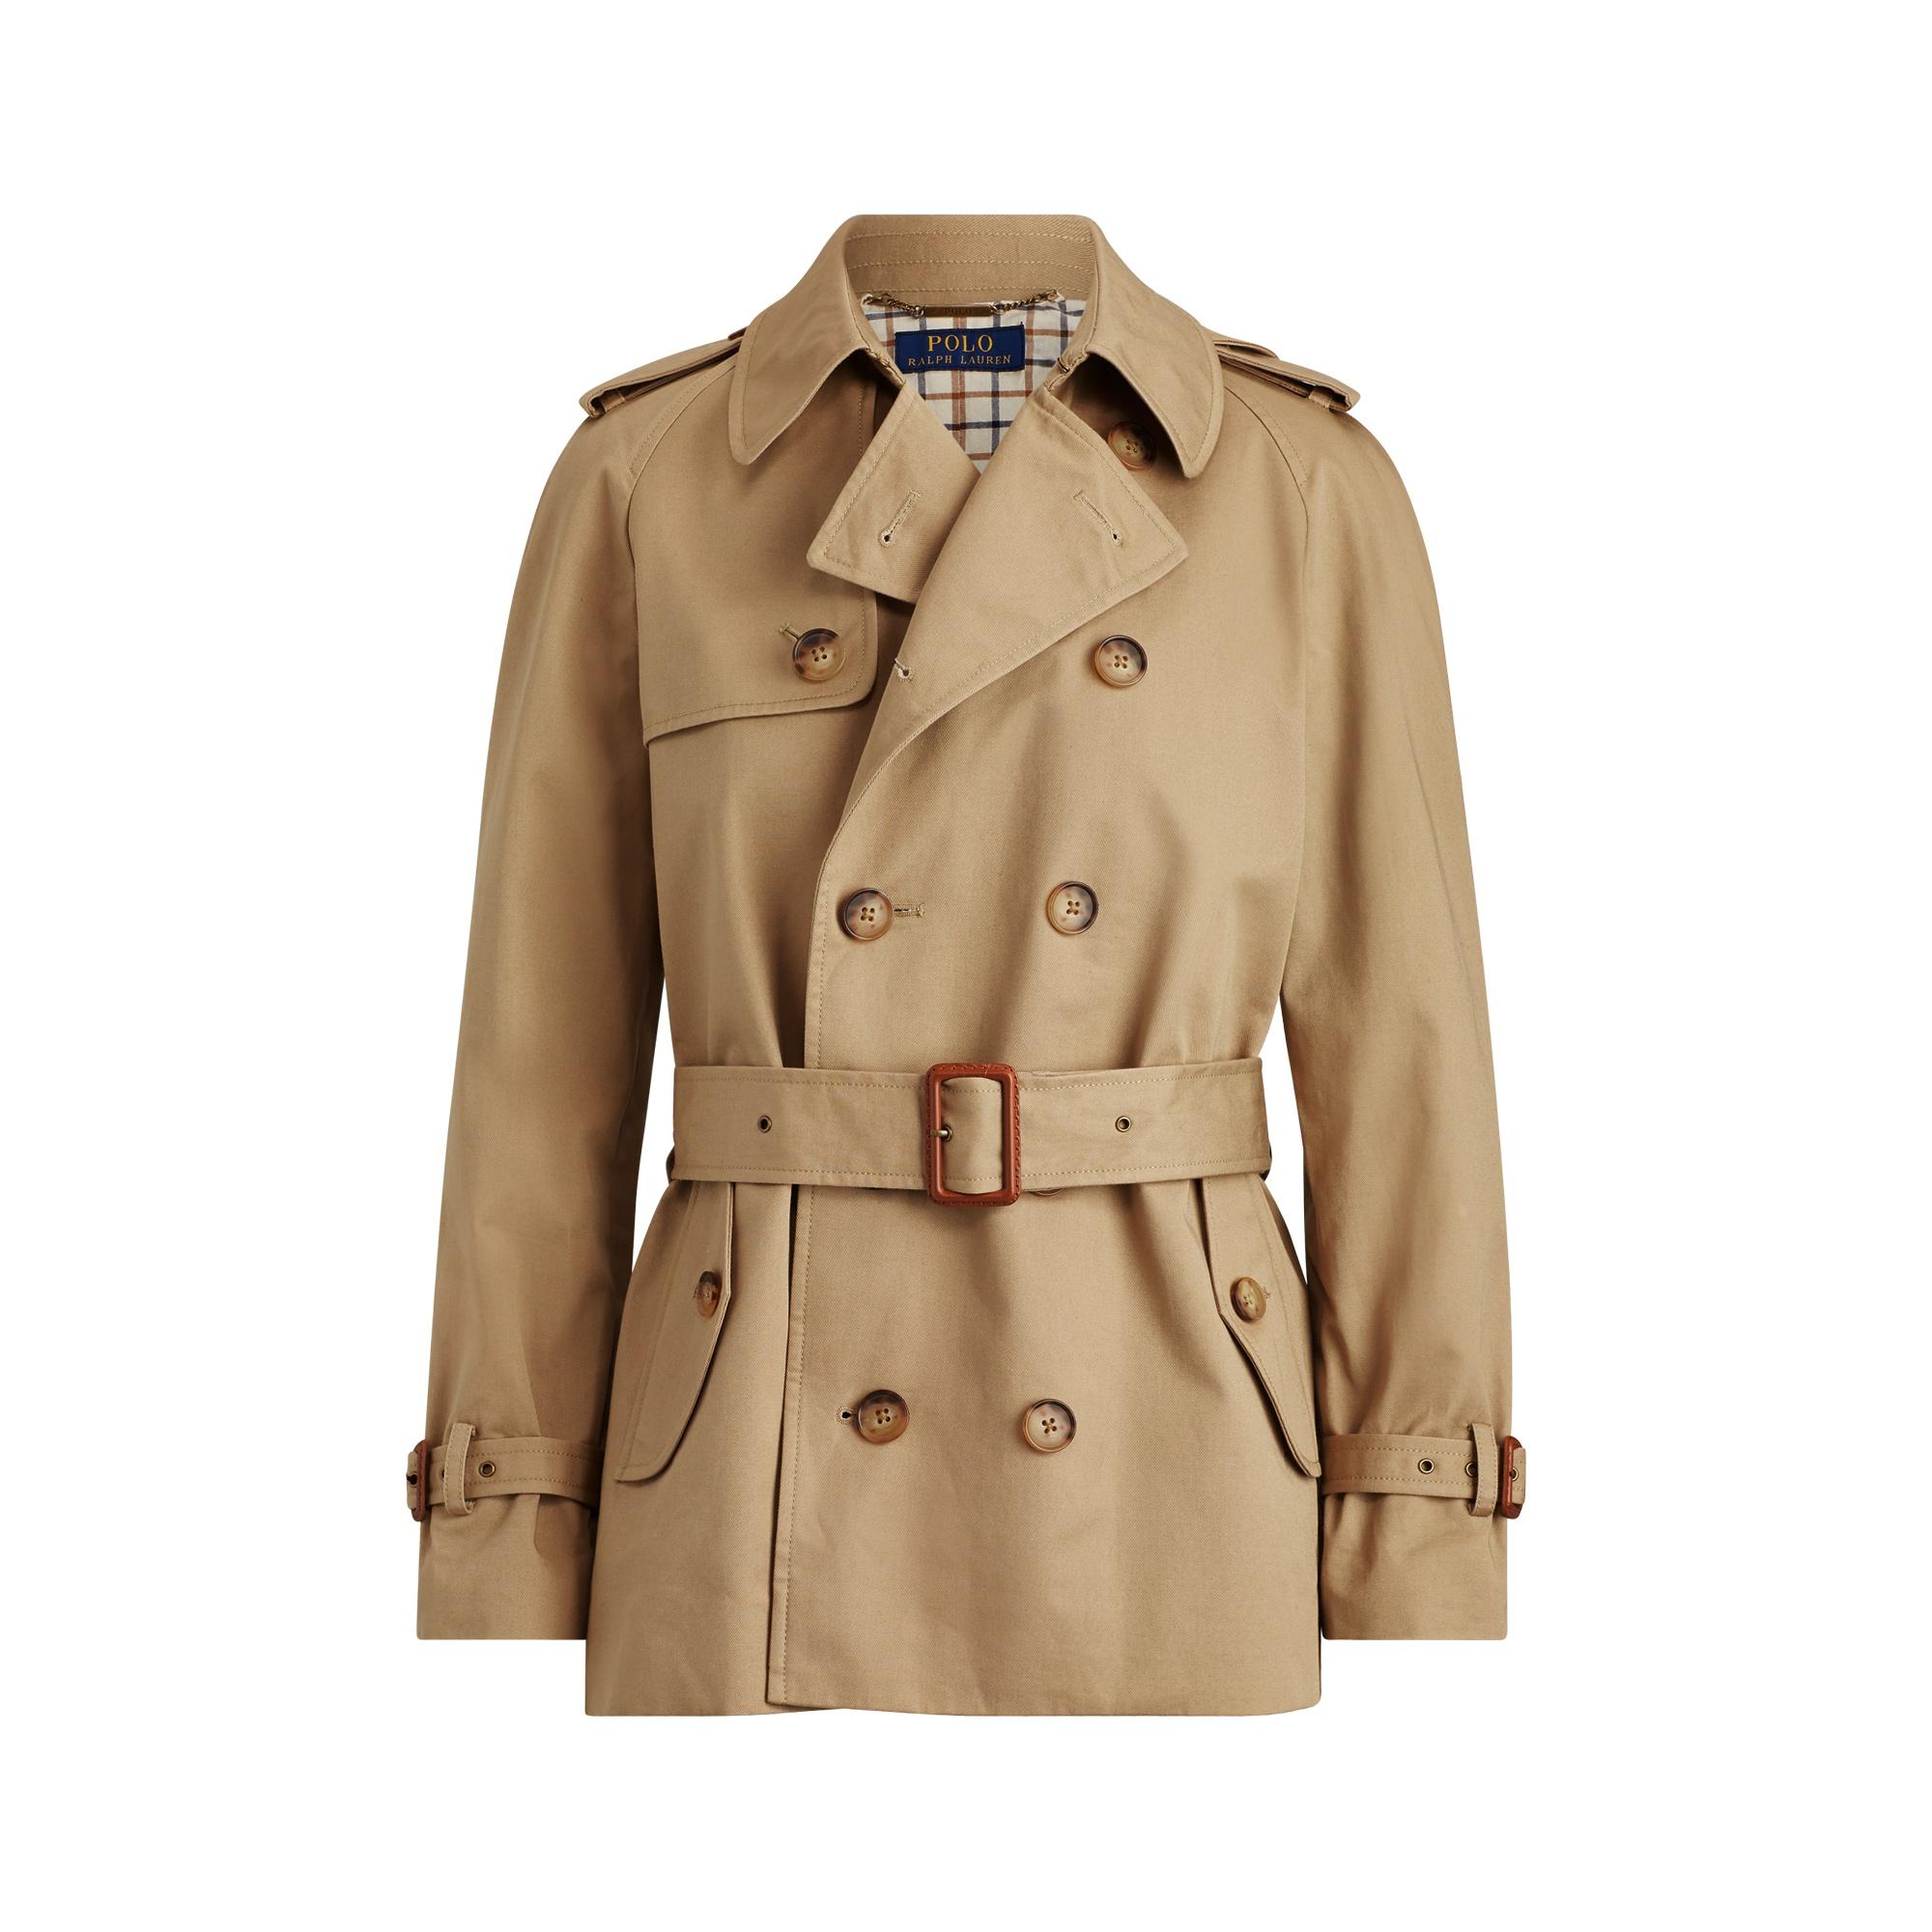 Ralph Lauren Twill Belted Trench Coat in Natural - Lyst